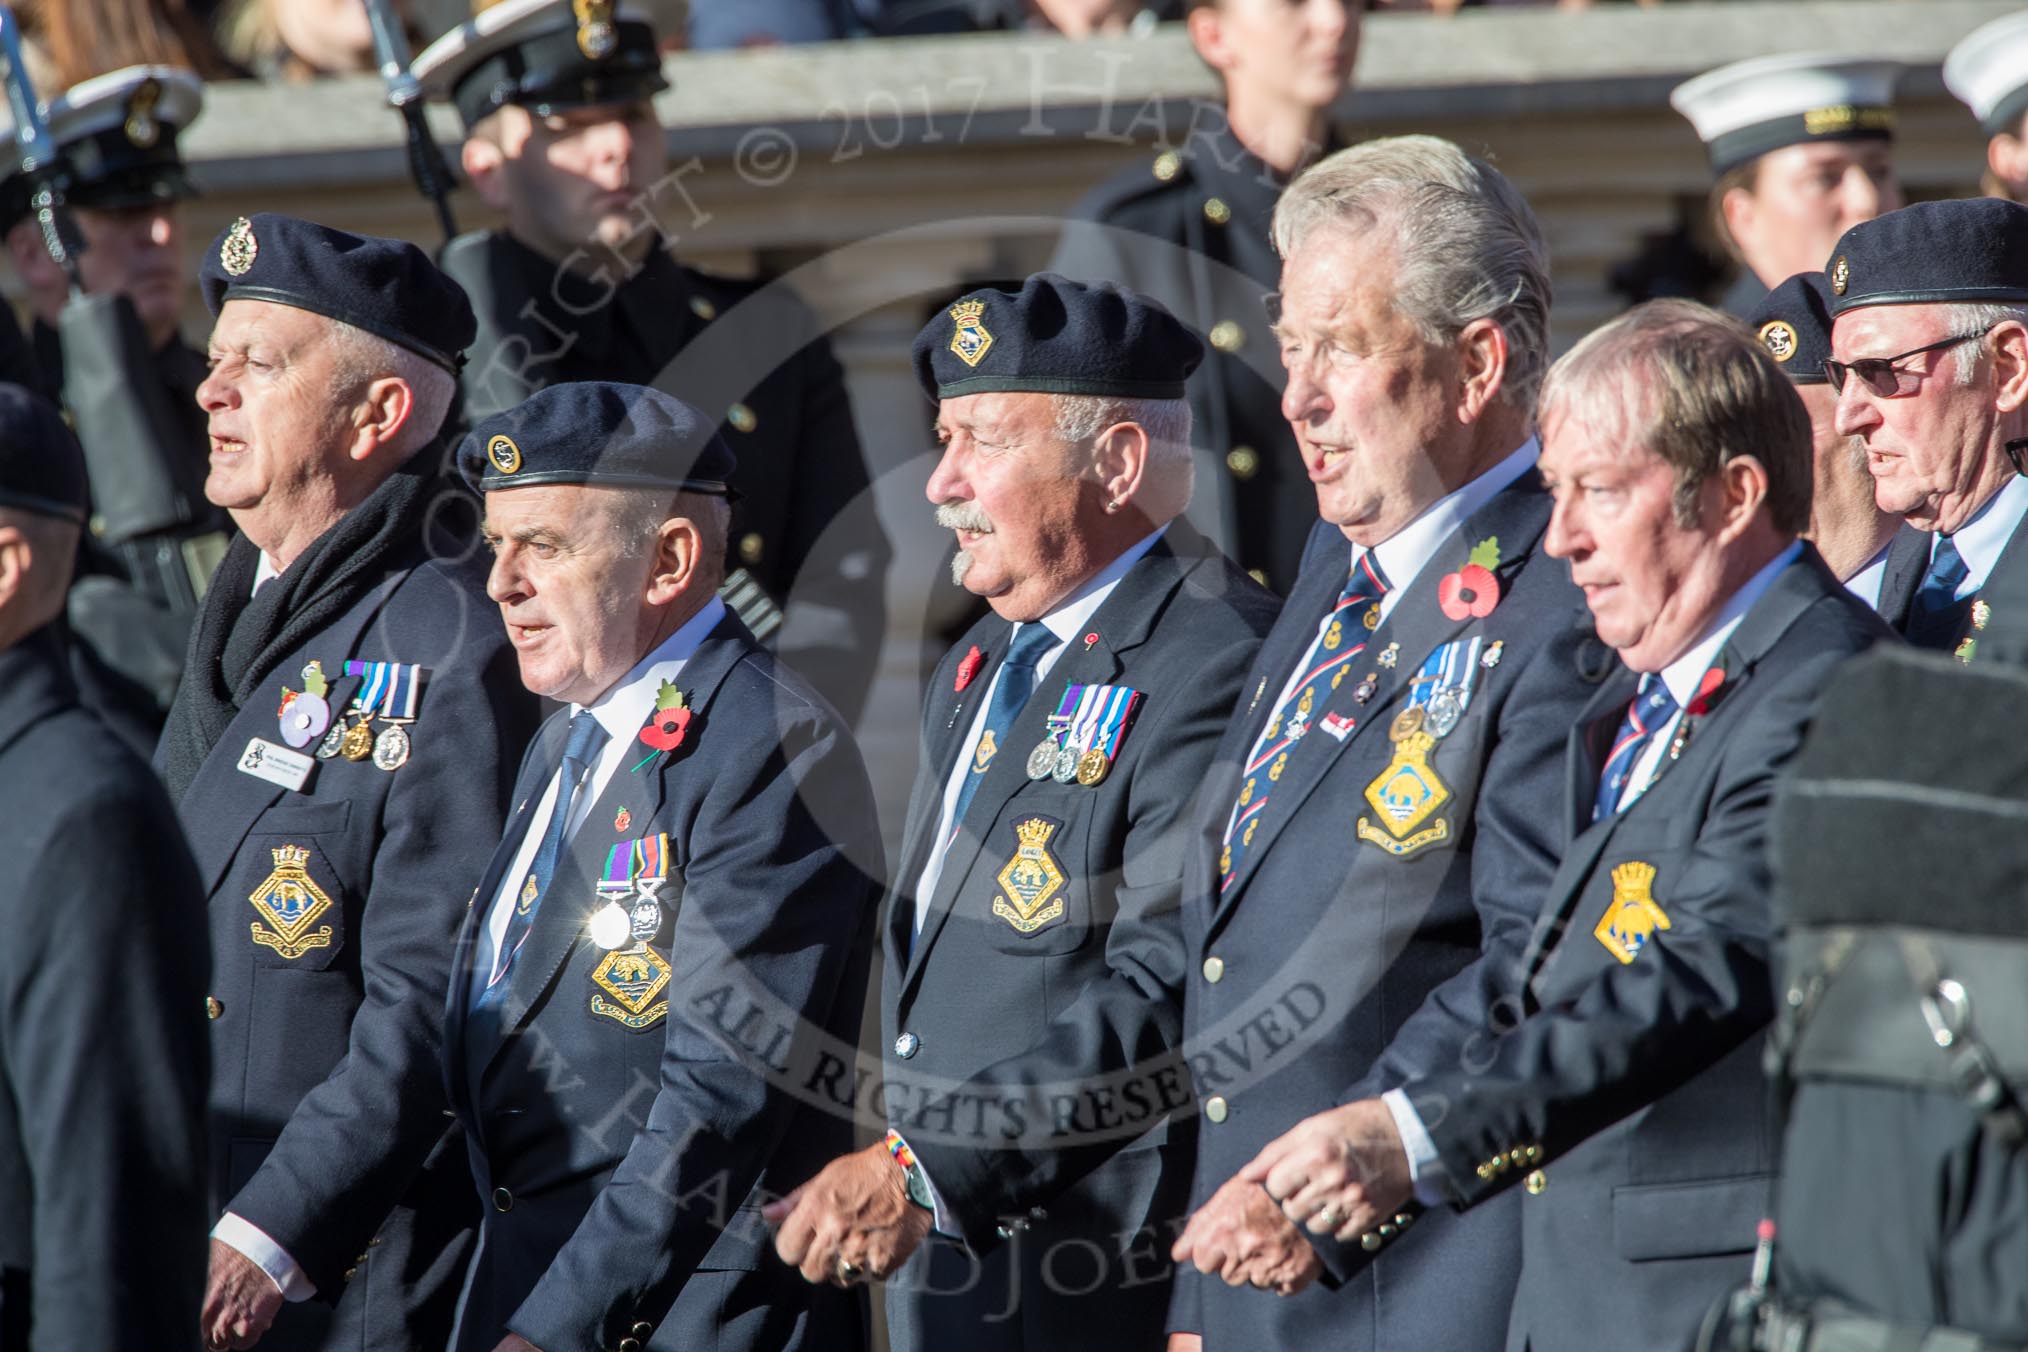 HMS Ganges Association  (Group E20, 30 members)during the Royal British Legion March Past on Remembrance Sunday at the Cenotaph, Whitehall, Westminster, London, 11 November 2018, 11:44.